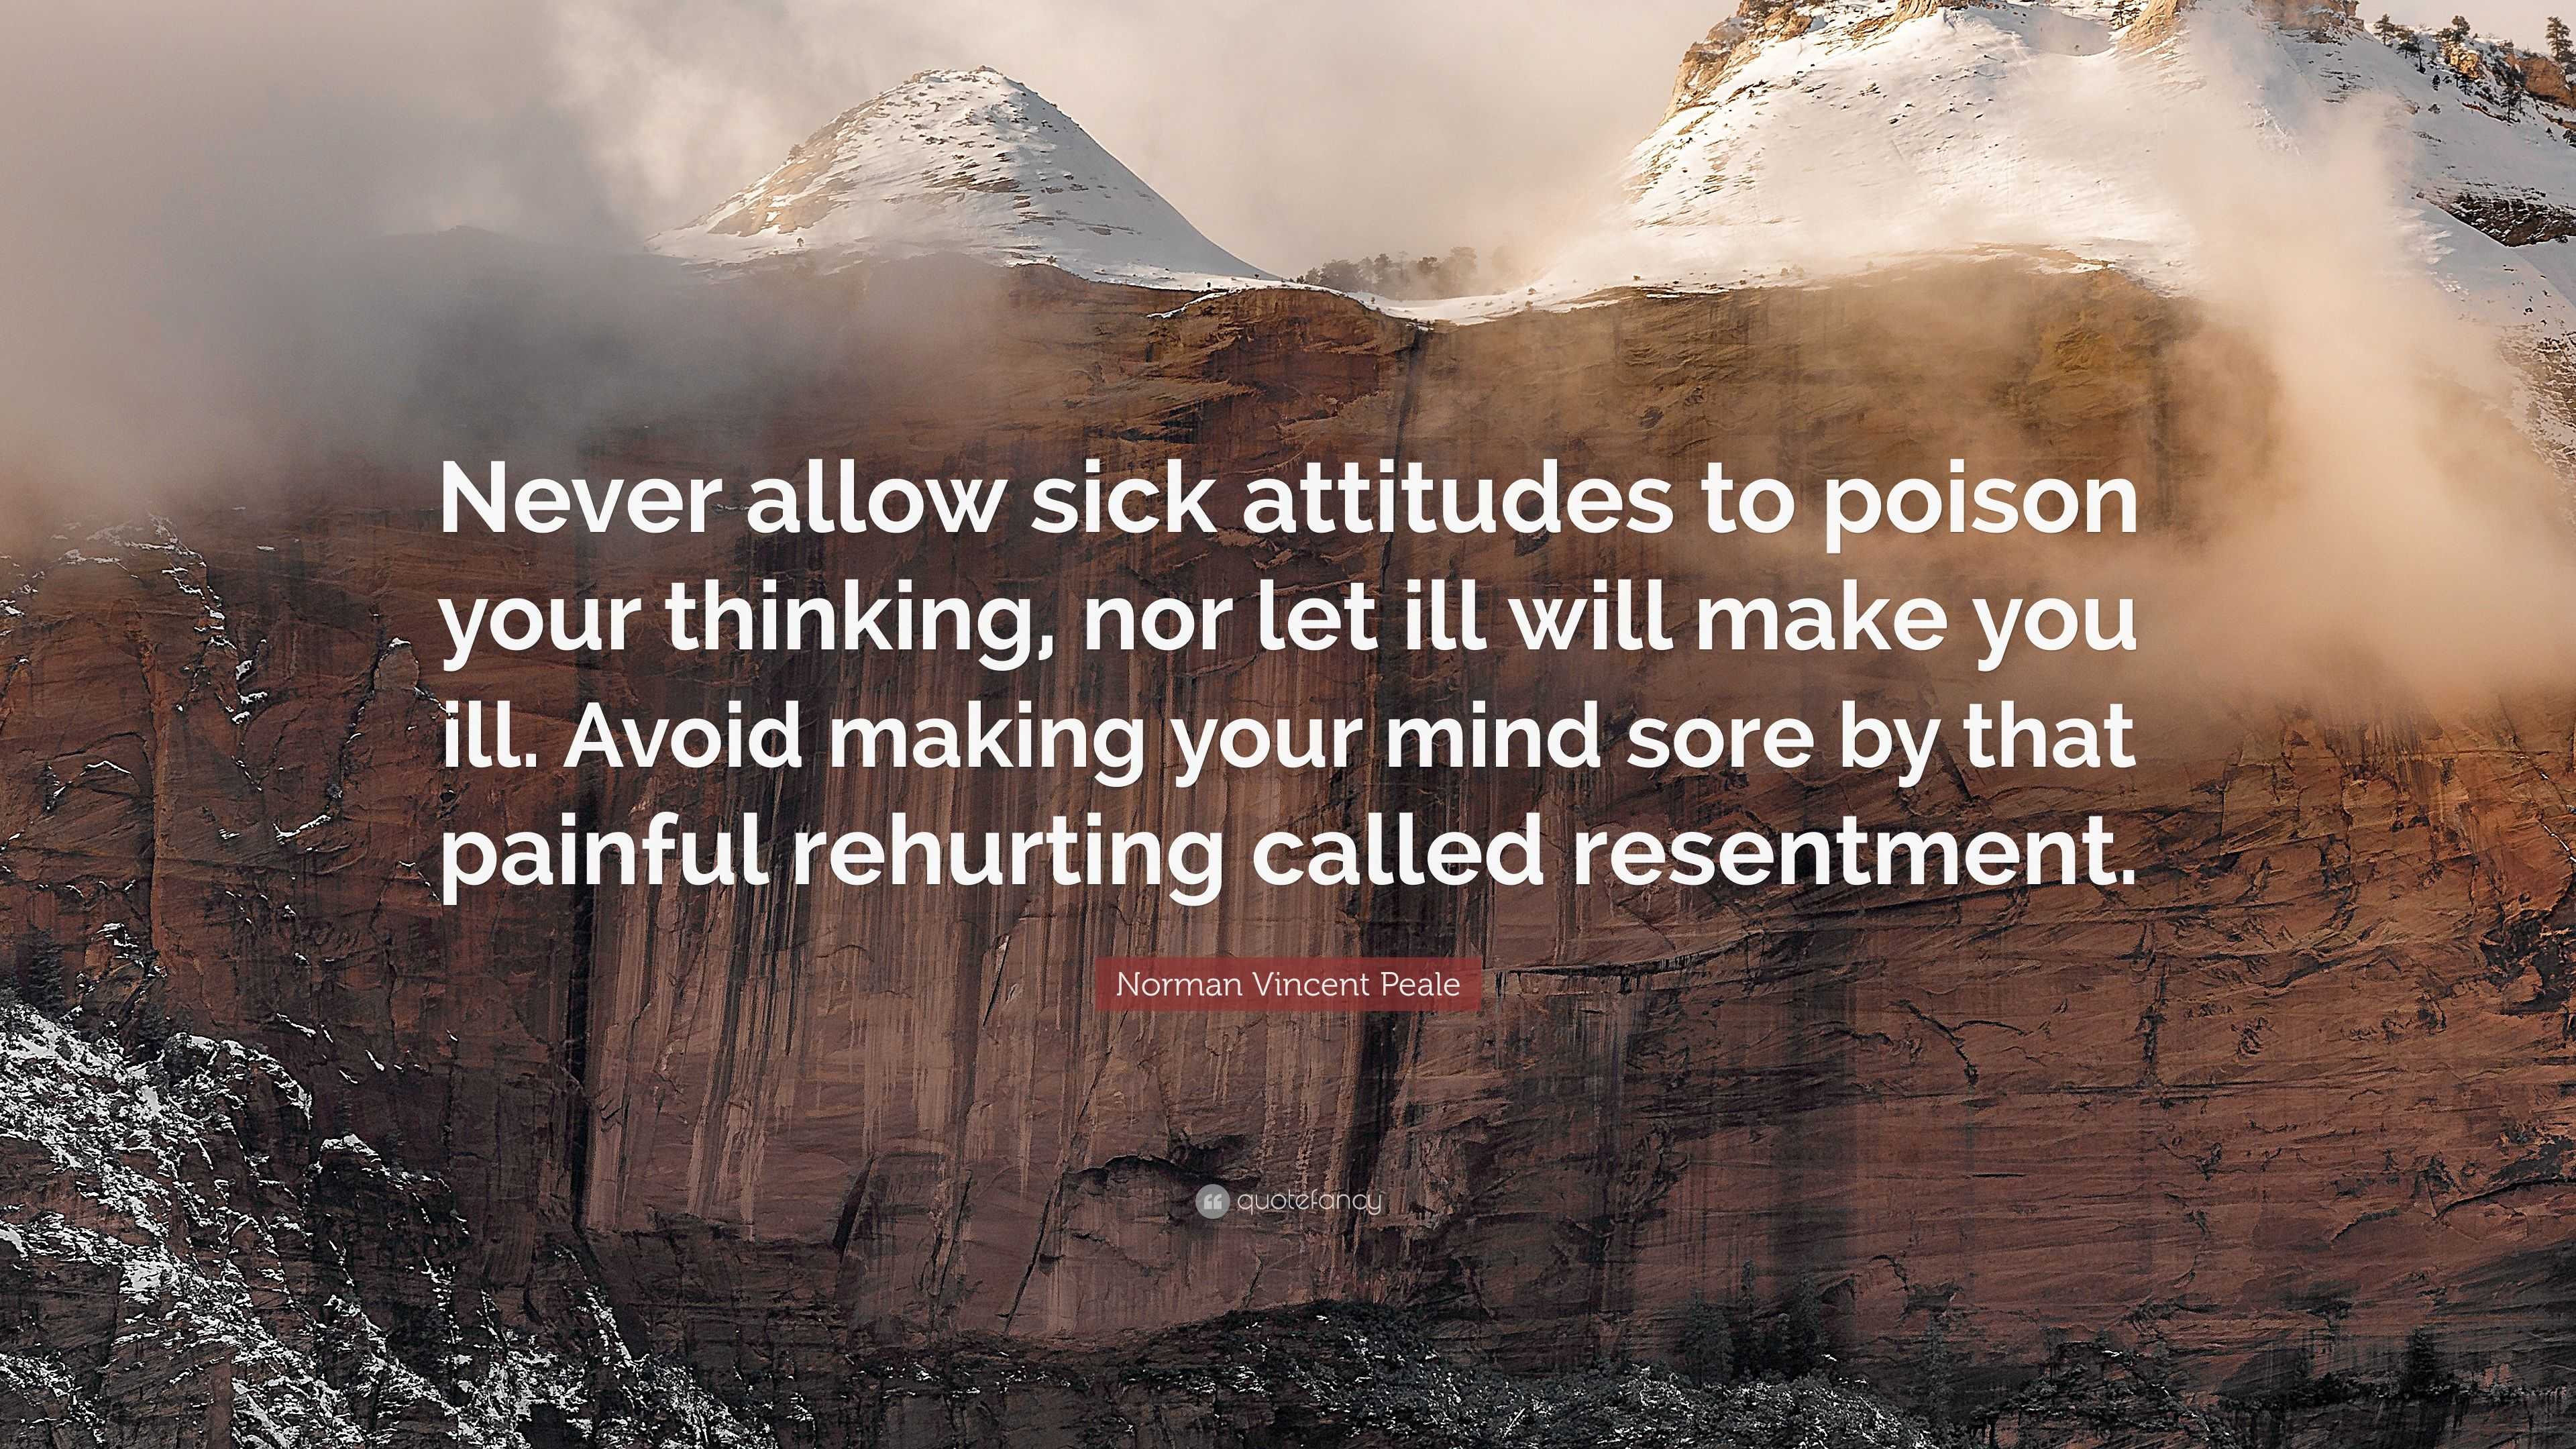 Norman Vincent Peale Quote “Never allow sick attitudes to poison your thinking nor